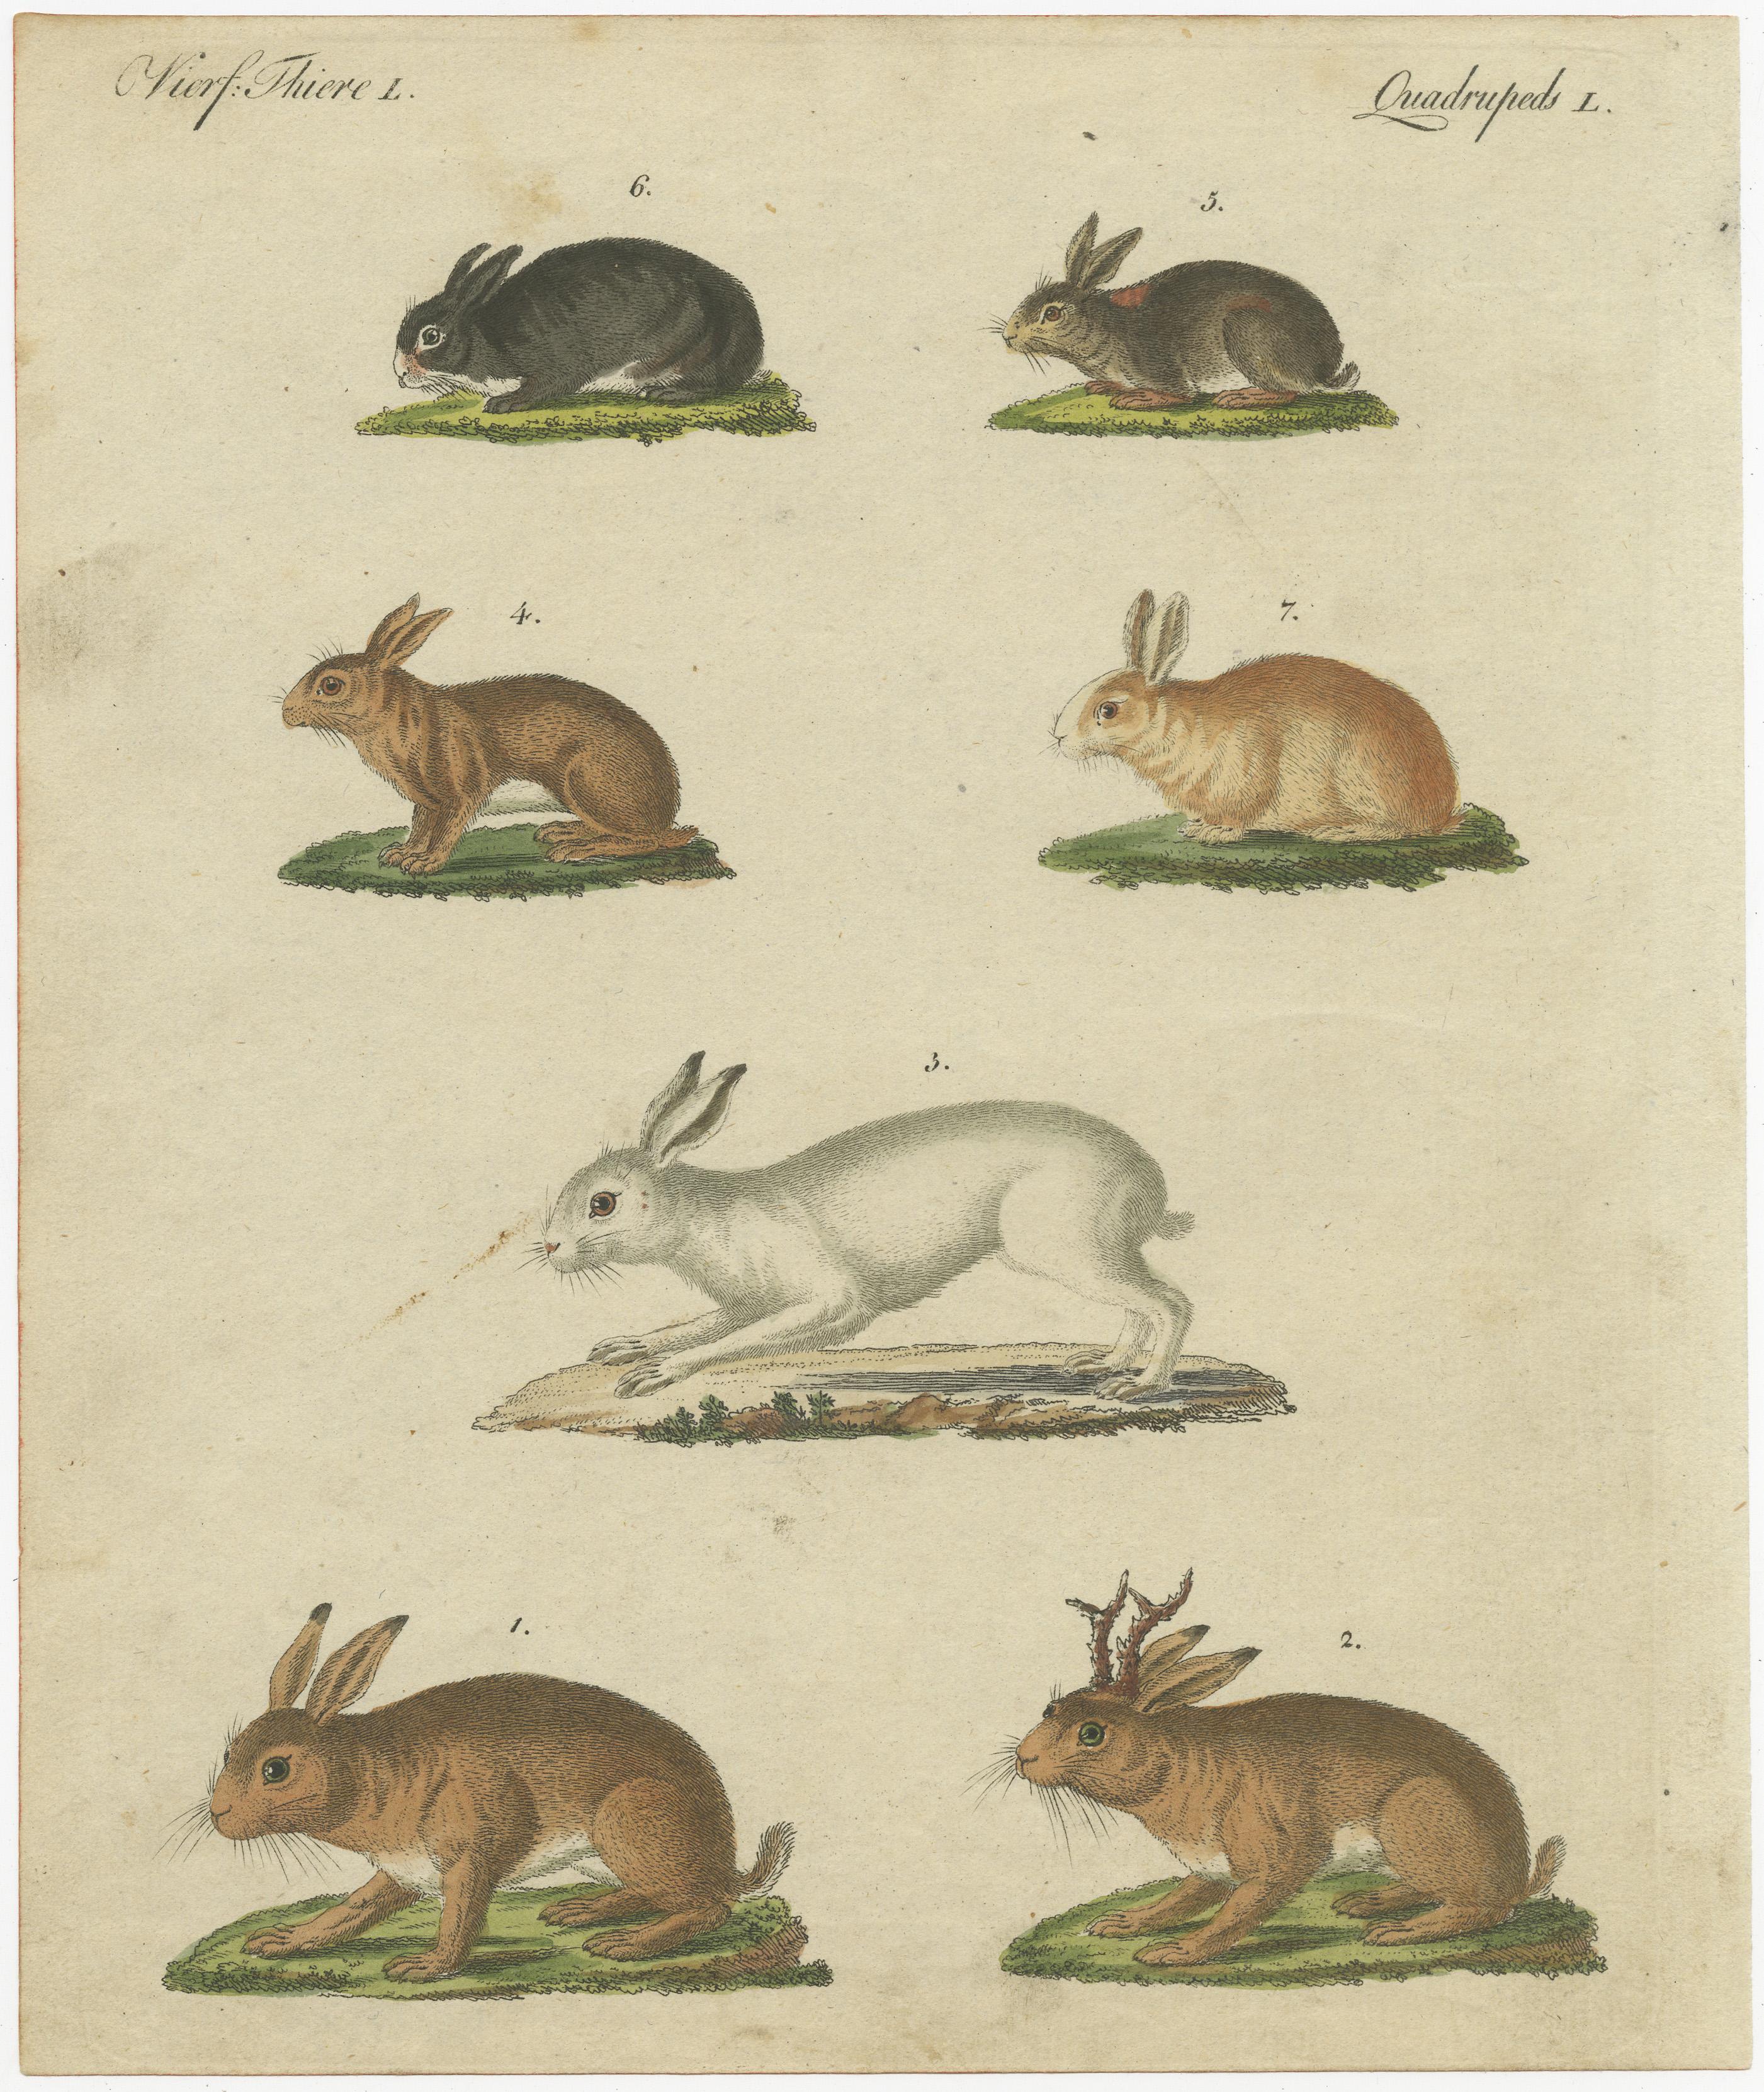 This original antique print shows the Mountain hare, Lepus timidus 1, mythical jackalope or horned hare, Lepus temperamentalus 2, northern white hare, Lepus timidus 3, snowshoe hare, Lepus americanus 4, rabbit, Lepus cuniculus 5,6, and Angora